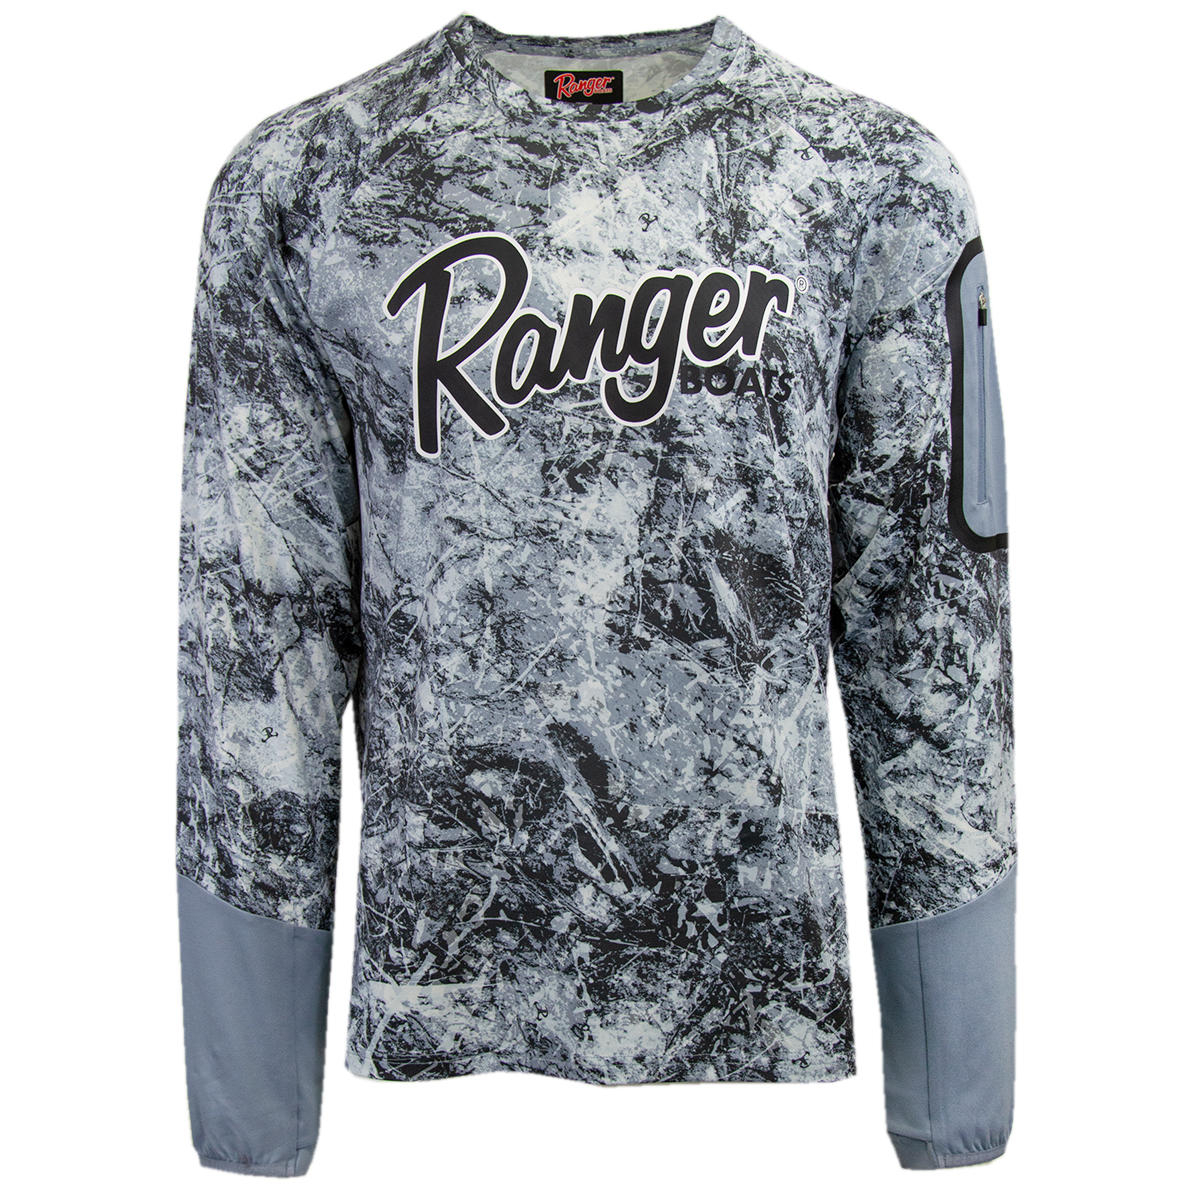 Ranger Boats Take It Out On The Water Short-Sleeve T-Shirt for Men